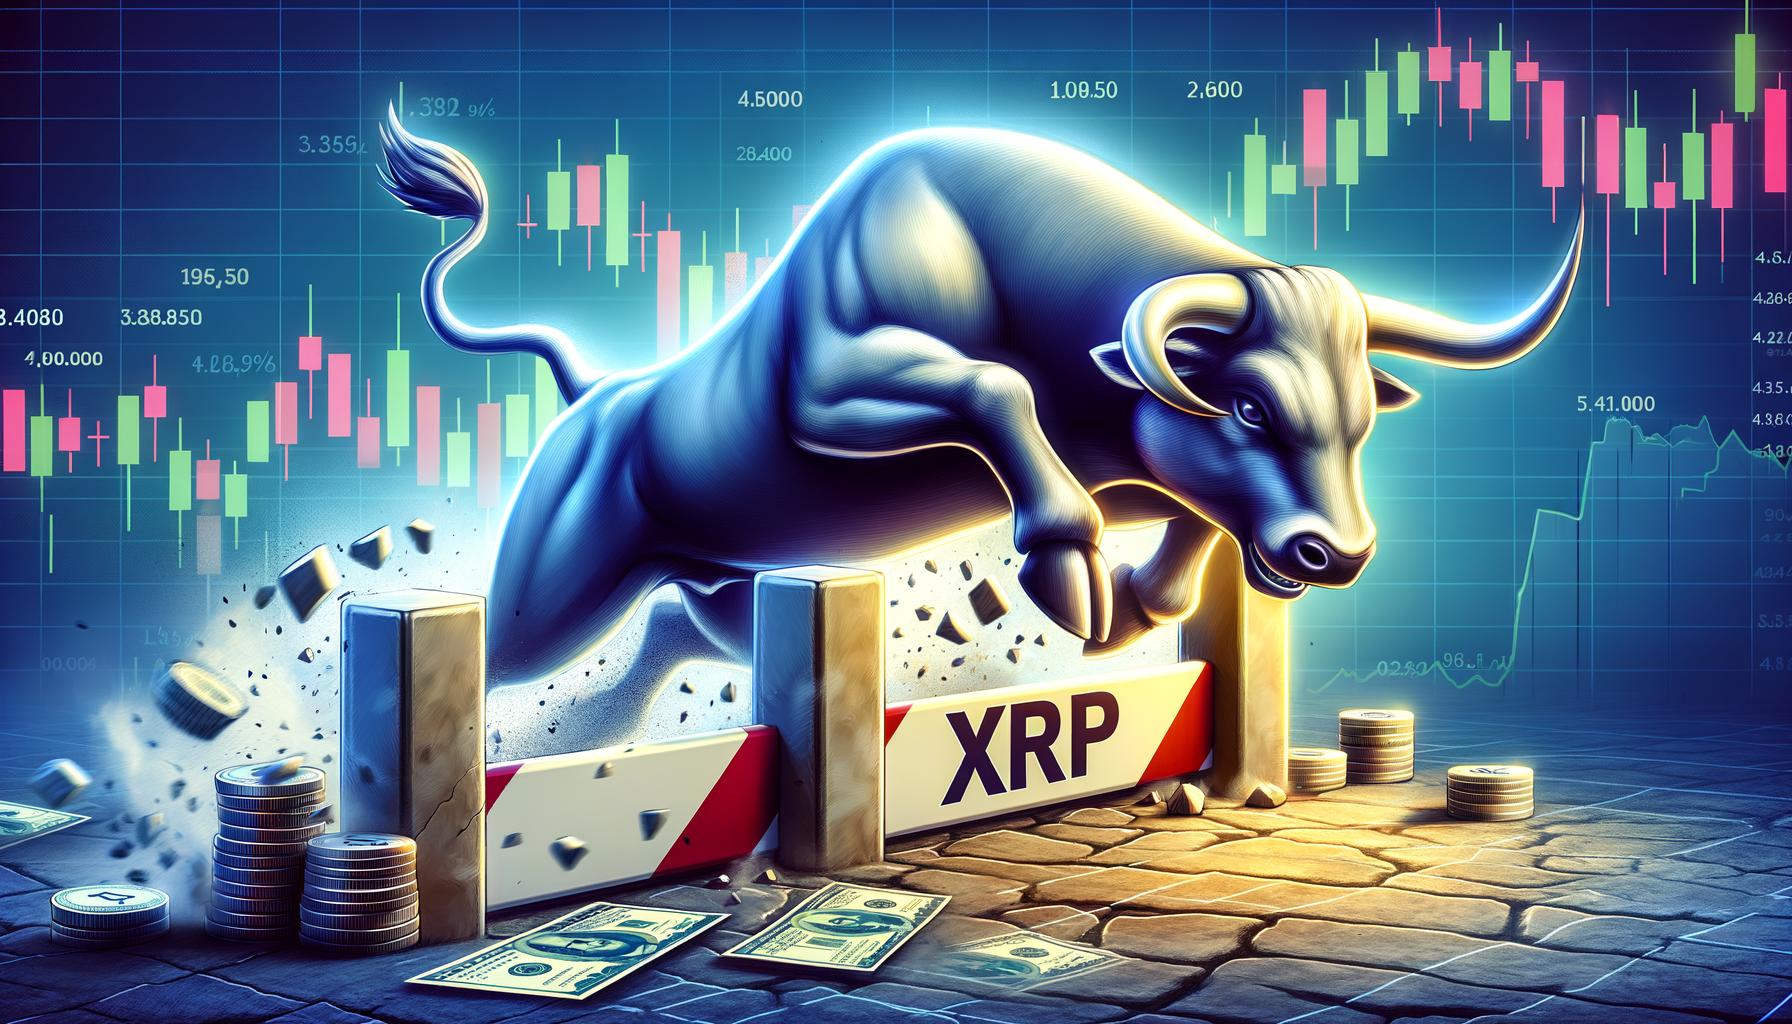 Can XRP Price Maintain Momentum? Key Levels to Watch in the Short Term